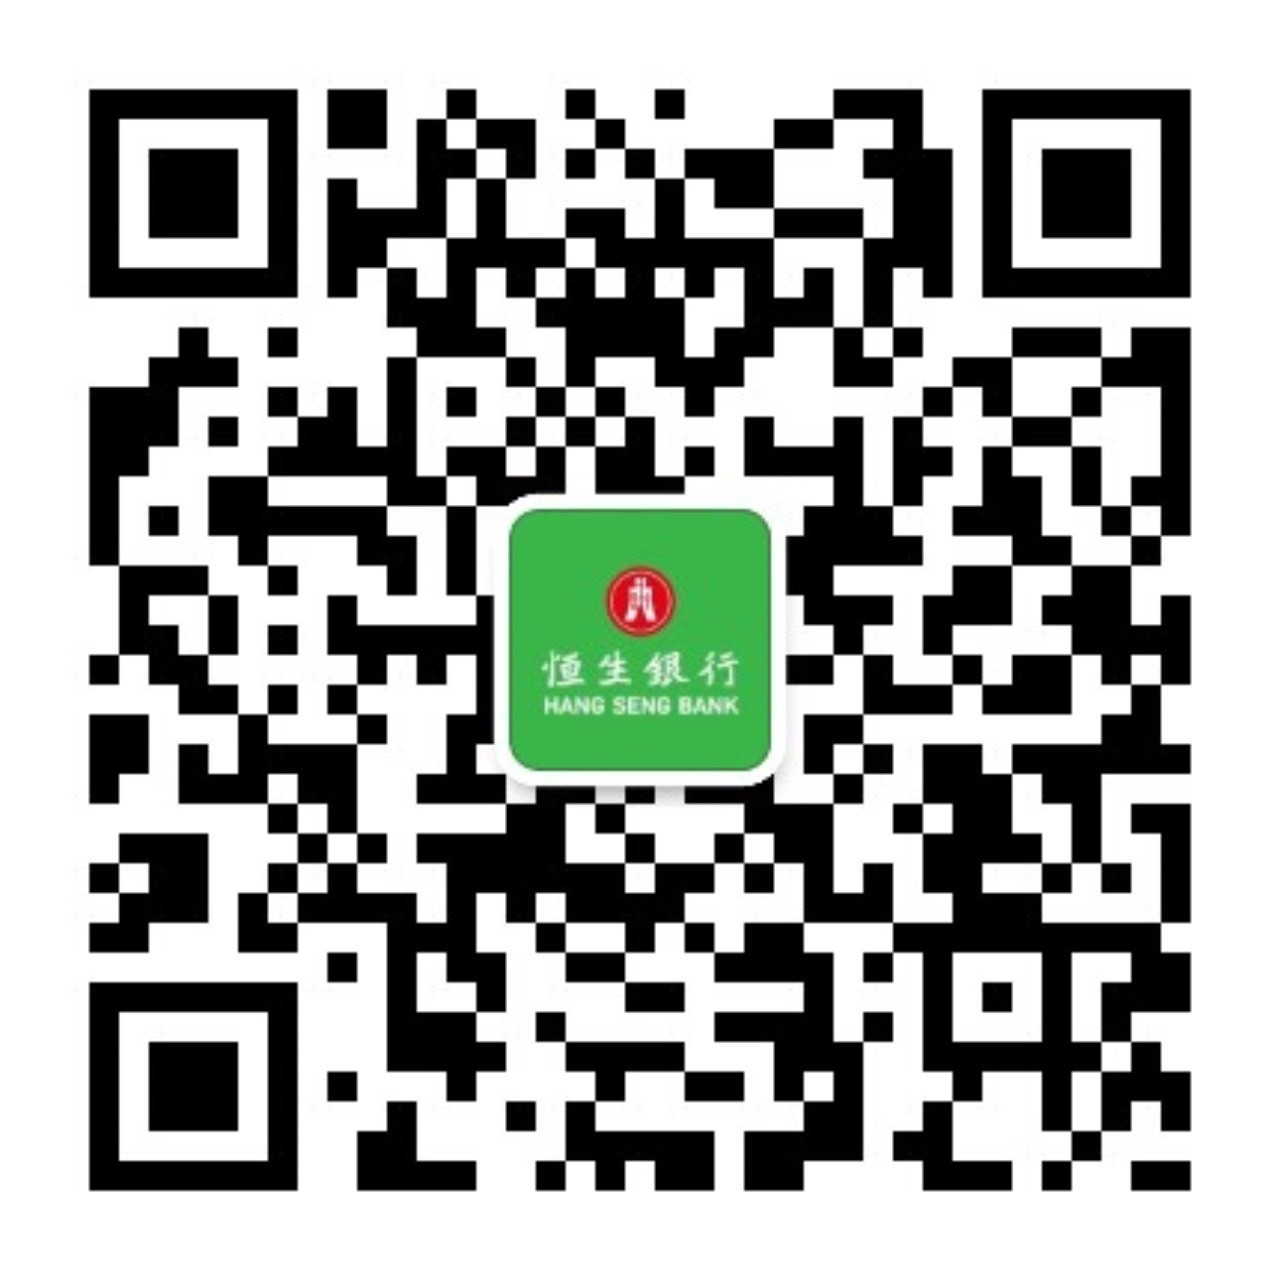 Find us by searching HangSeng_HK 或 恒生香港個人理財  or by scanning our QR code within the WeChat app.